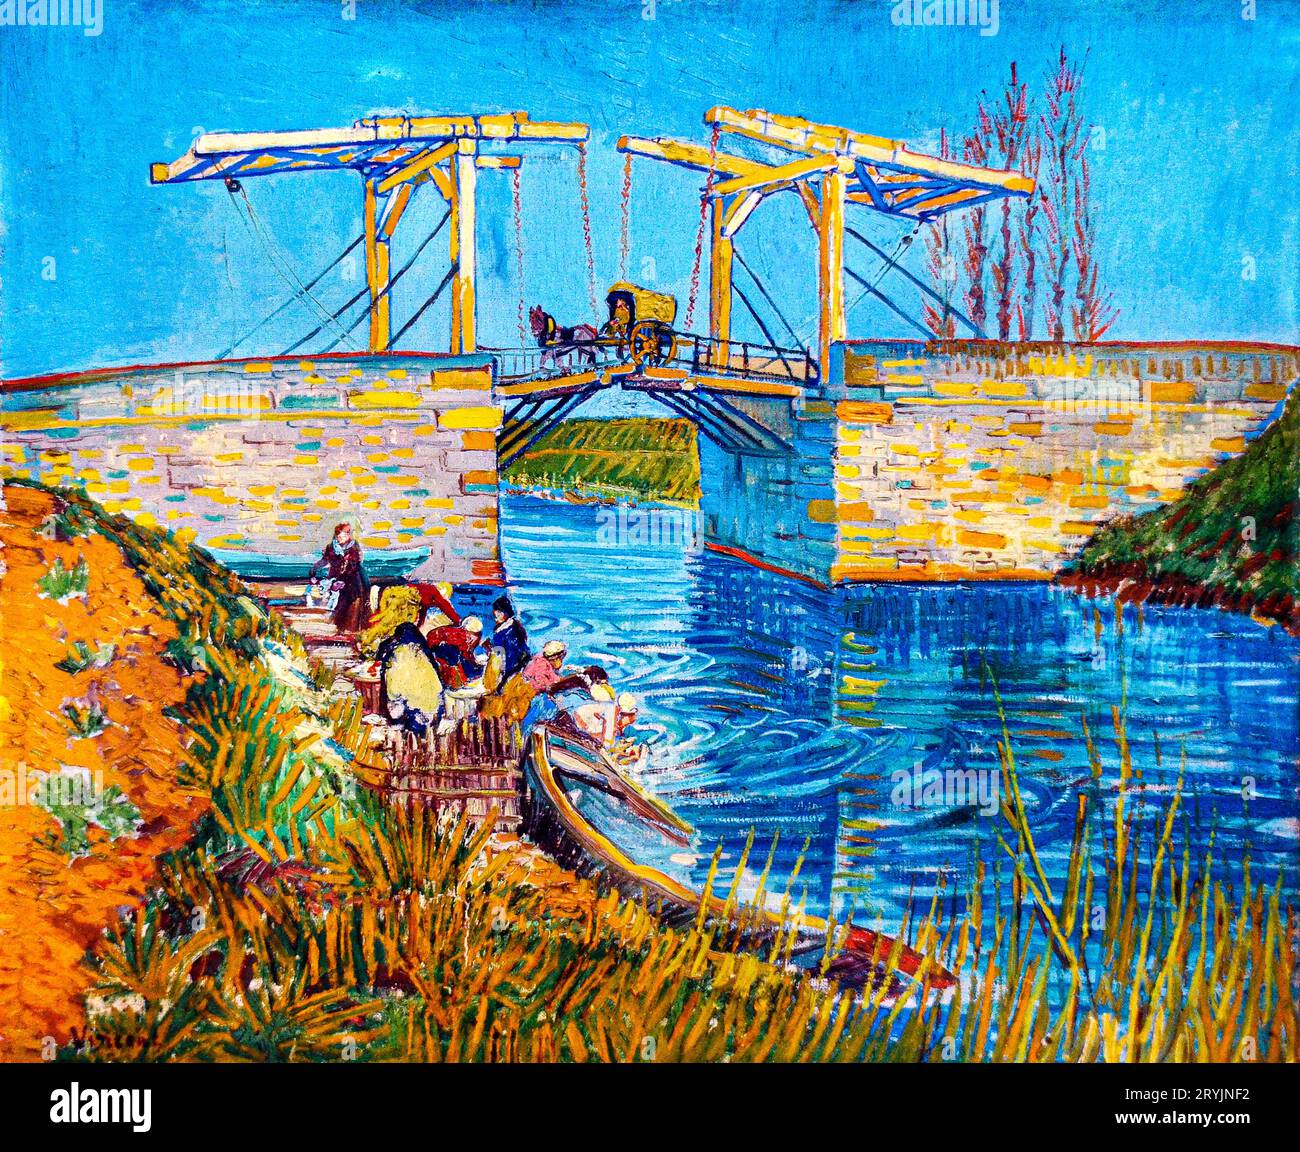 Vincent van Gogh's The Langlois Bridge at Arles with Women Washing (1888) famous painting. Stock Photo